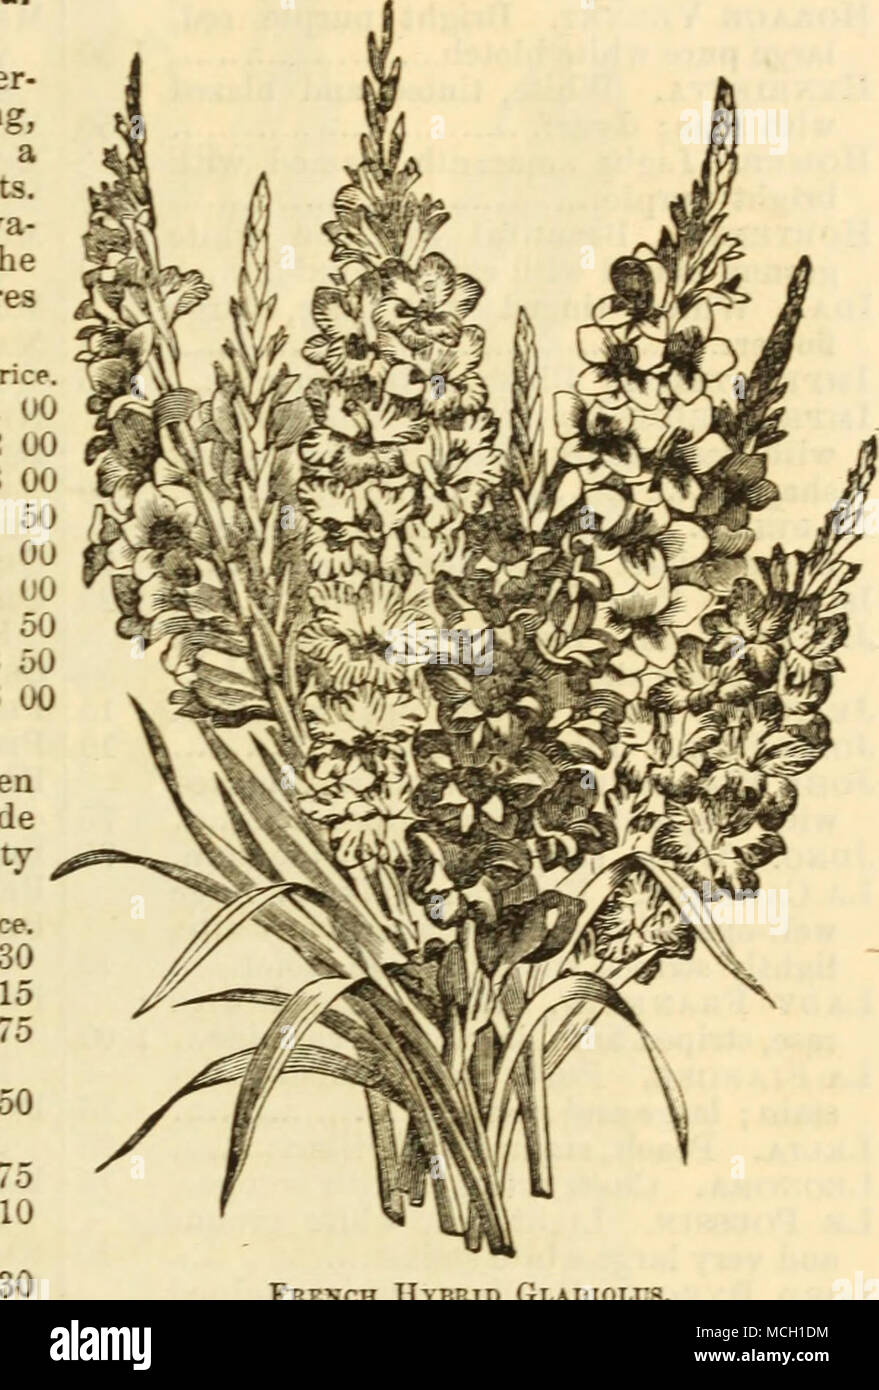 . 50 20 French Hybrid Gladiolus. Price. Clemence. White, with crimson flakes. 20 Comte de Morny. Dark cherrv, white blotches 20 Couranti FuLGENS. Dark crimson 10 Cuvier. Amaranth,blazed with purple. 25 Daphne. Light cherry, dark stripes 20 De Candolle. Cherry, blazed with red. 50 De Lamarck. Light cherry color, blazed with red; white stains $1 25 Delecatissima. White, slightly tinged, with carmine lilac 50 Diana. White, flaked with red 30 Didon. White, suffused with lilac 75 Don Juan. Orange and fire-red 10 Dr. Lindley. Light rose, blazed with cherry 50 Due de Malakoff. Orange red, blazed with Stock Photo